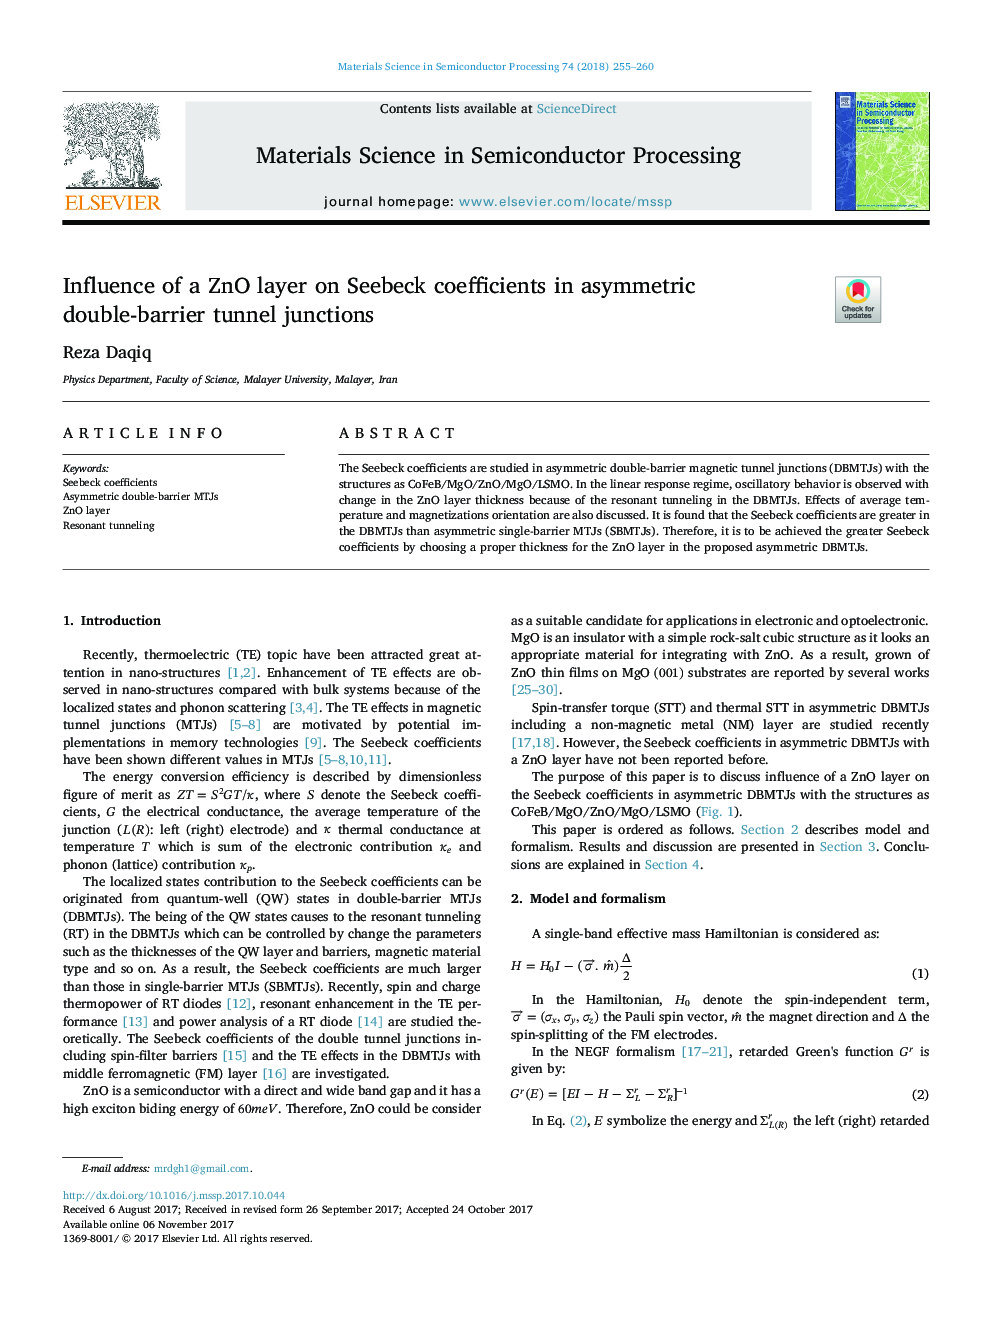 Influence of a ZnO layer on Seebeck coefficients in asymmetric double-barrier tunnel junctions